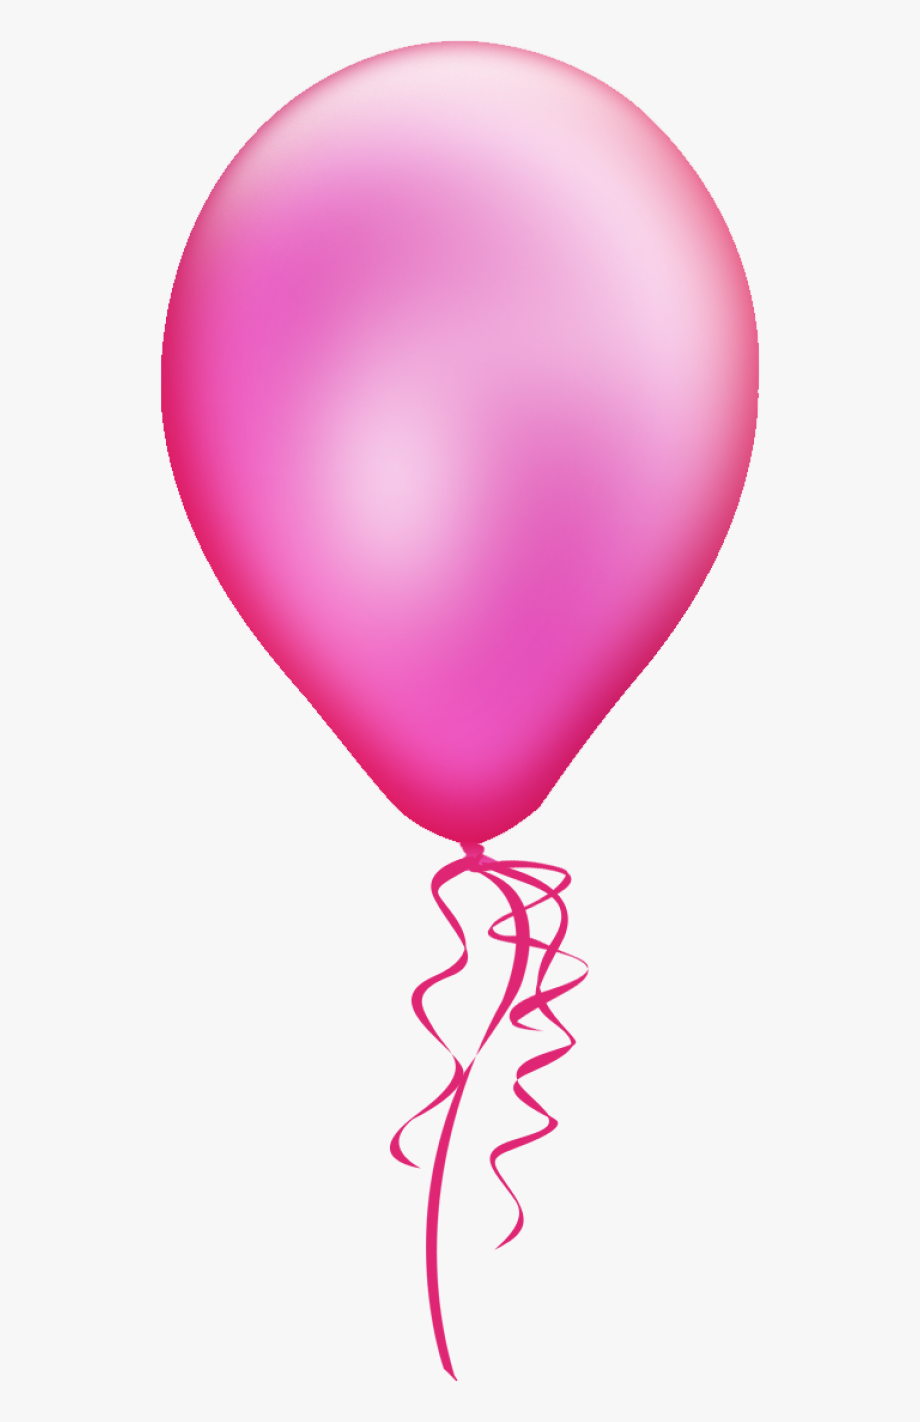 Balloon Png Image, Free Download, Balloons, Download